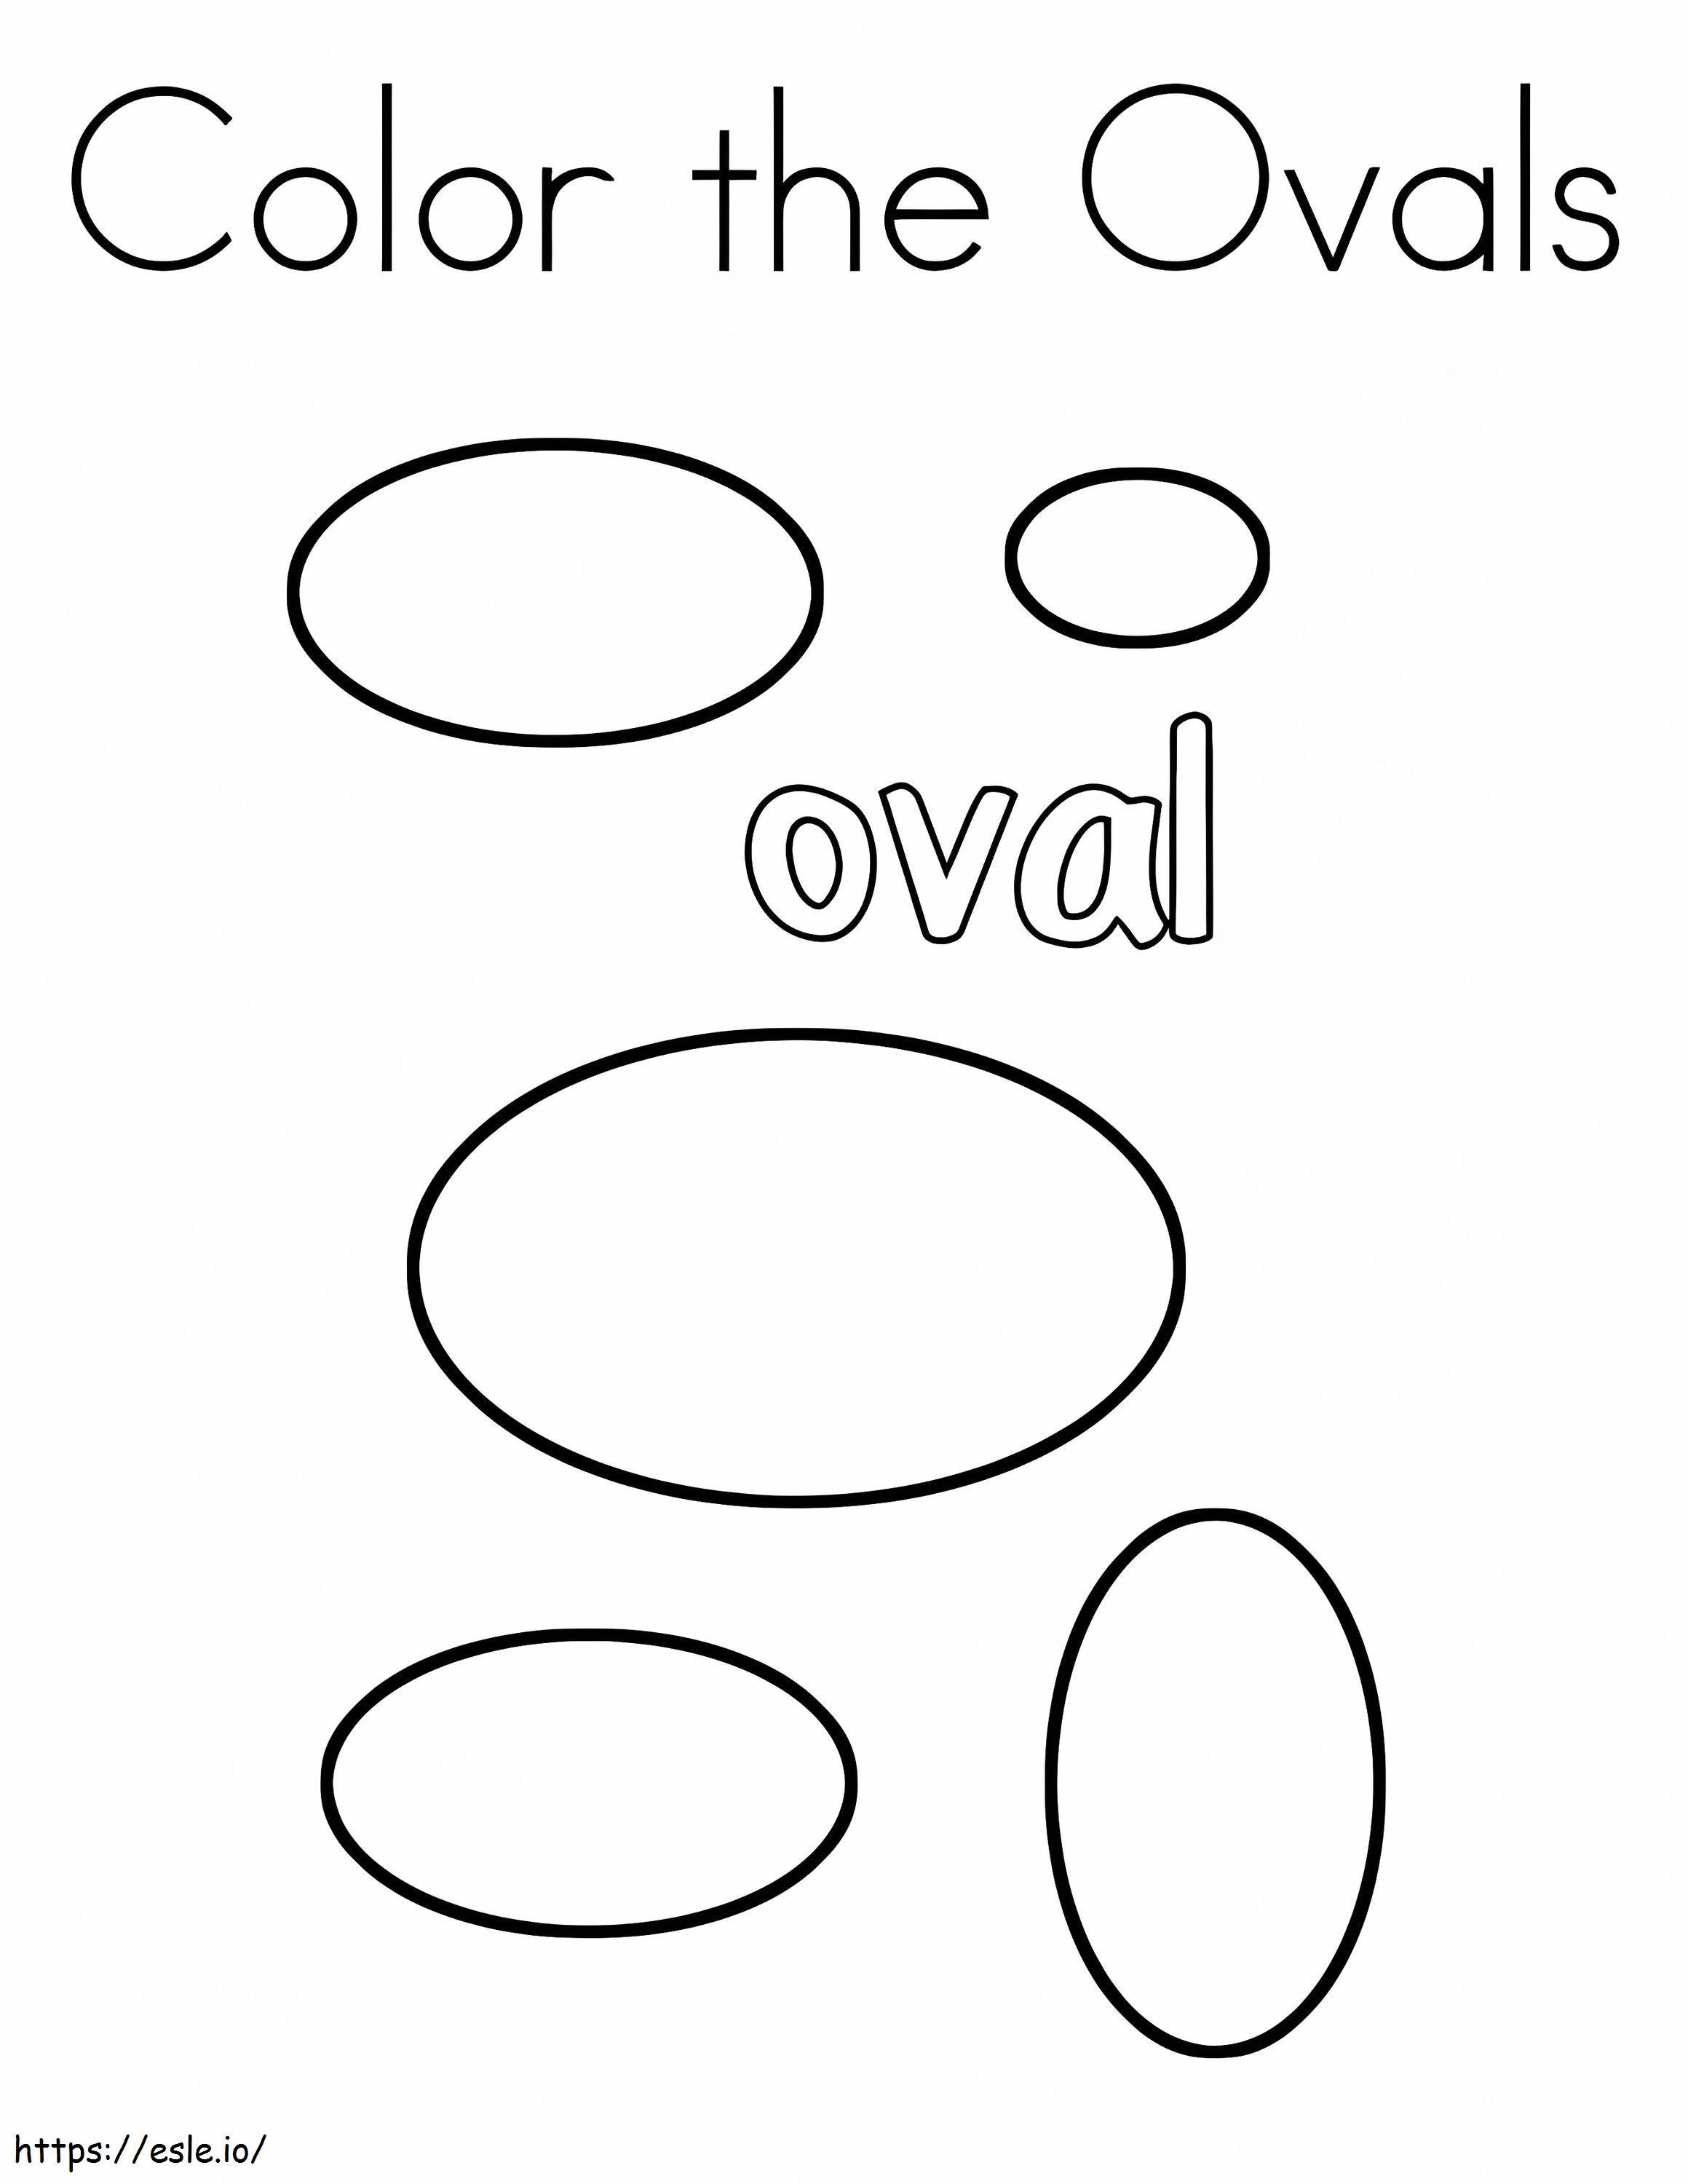 Oval Shape coloring page